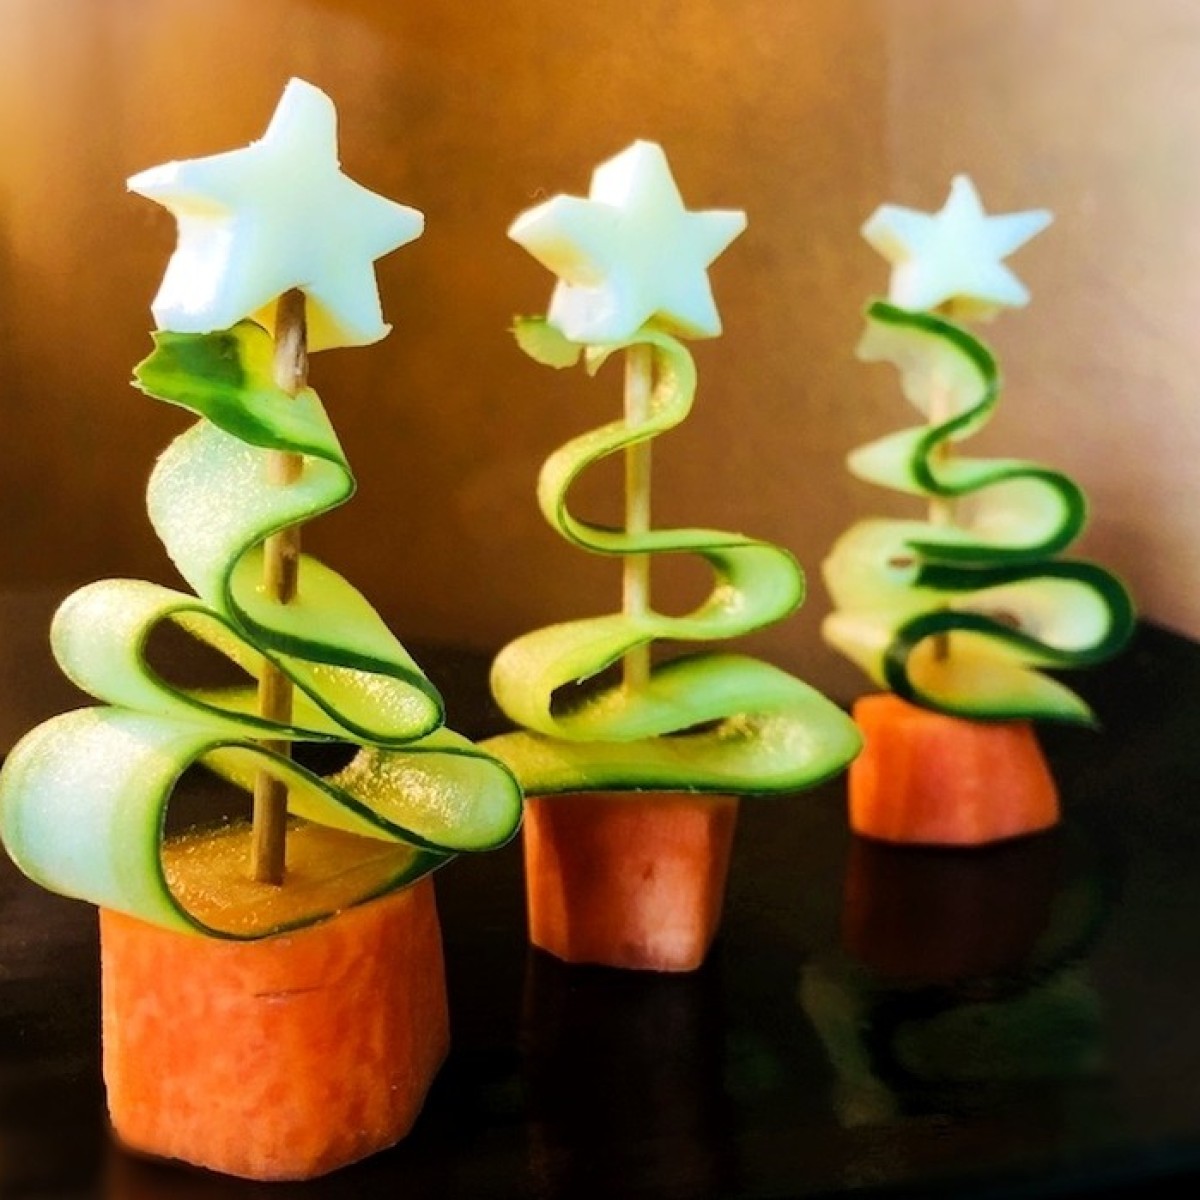 Veggie and Cheese Christmas Trees | My Frugal Christmas